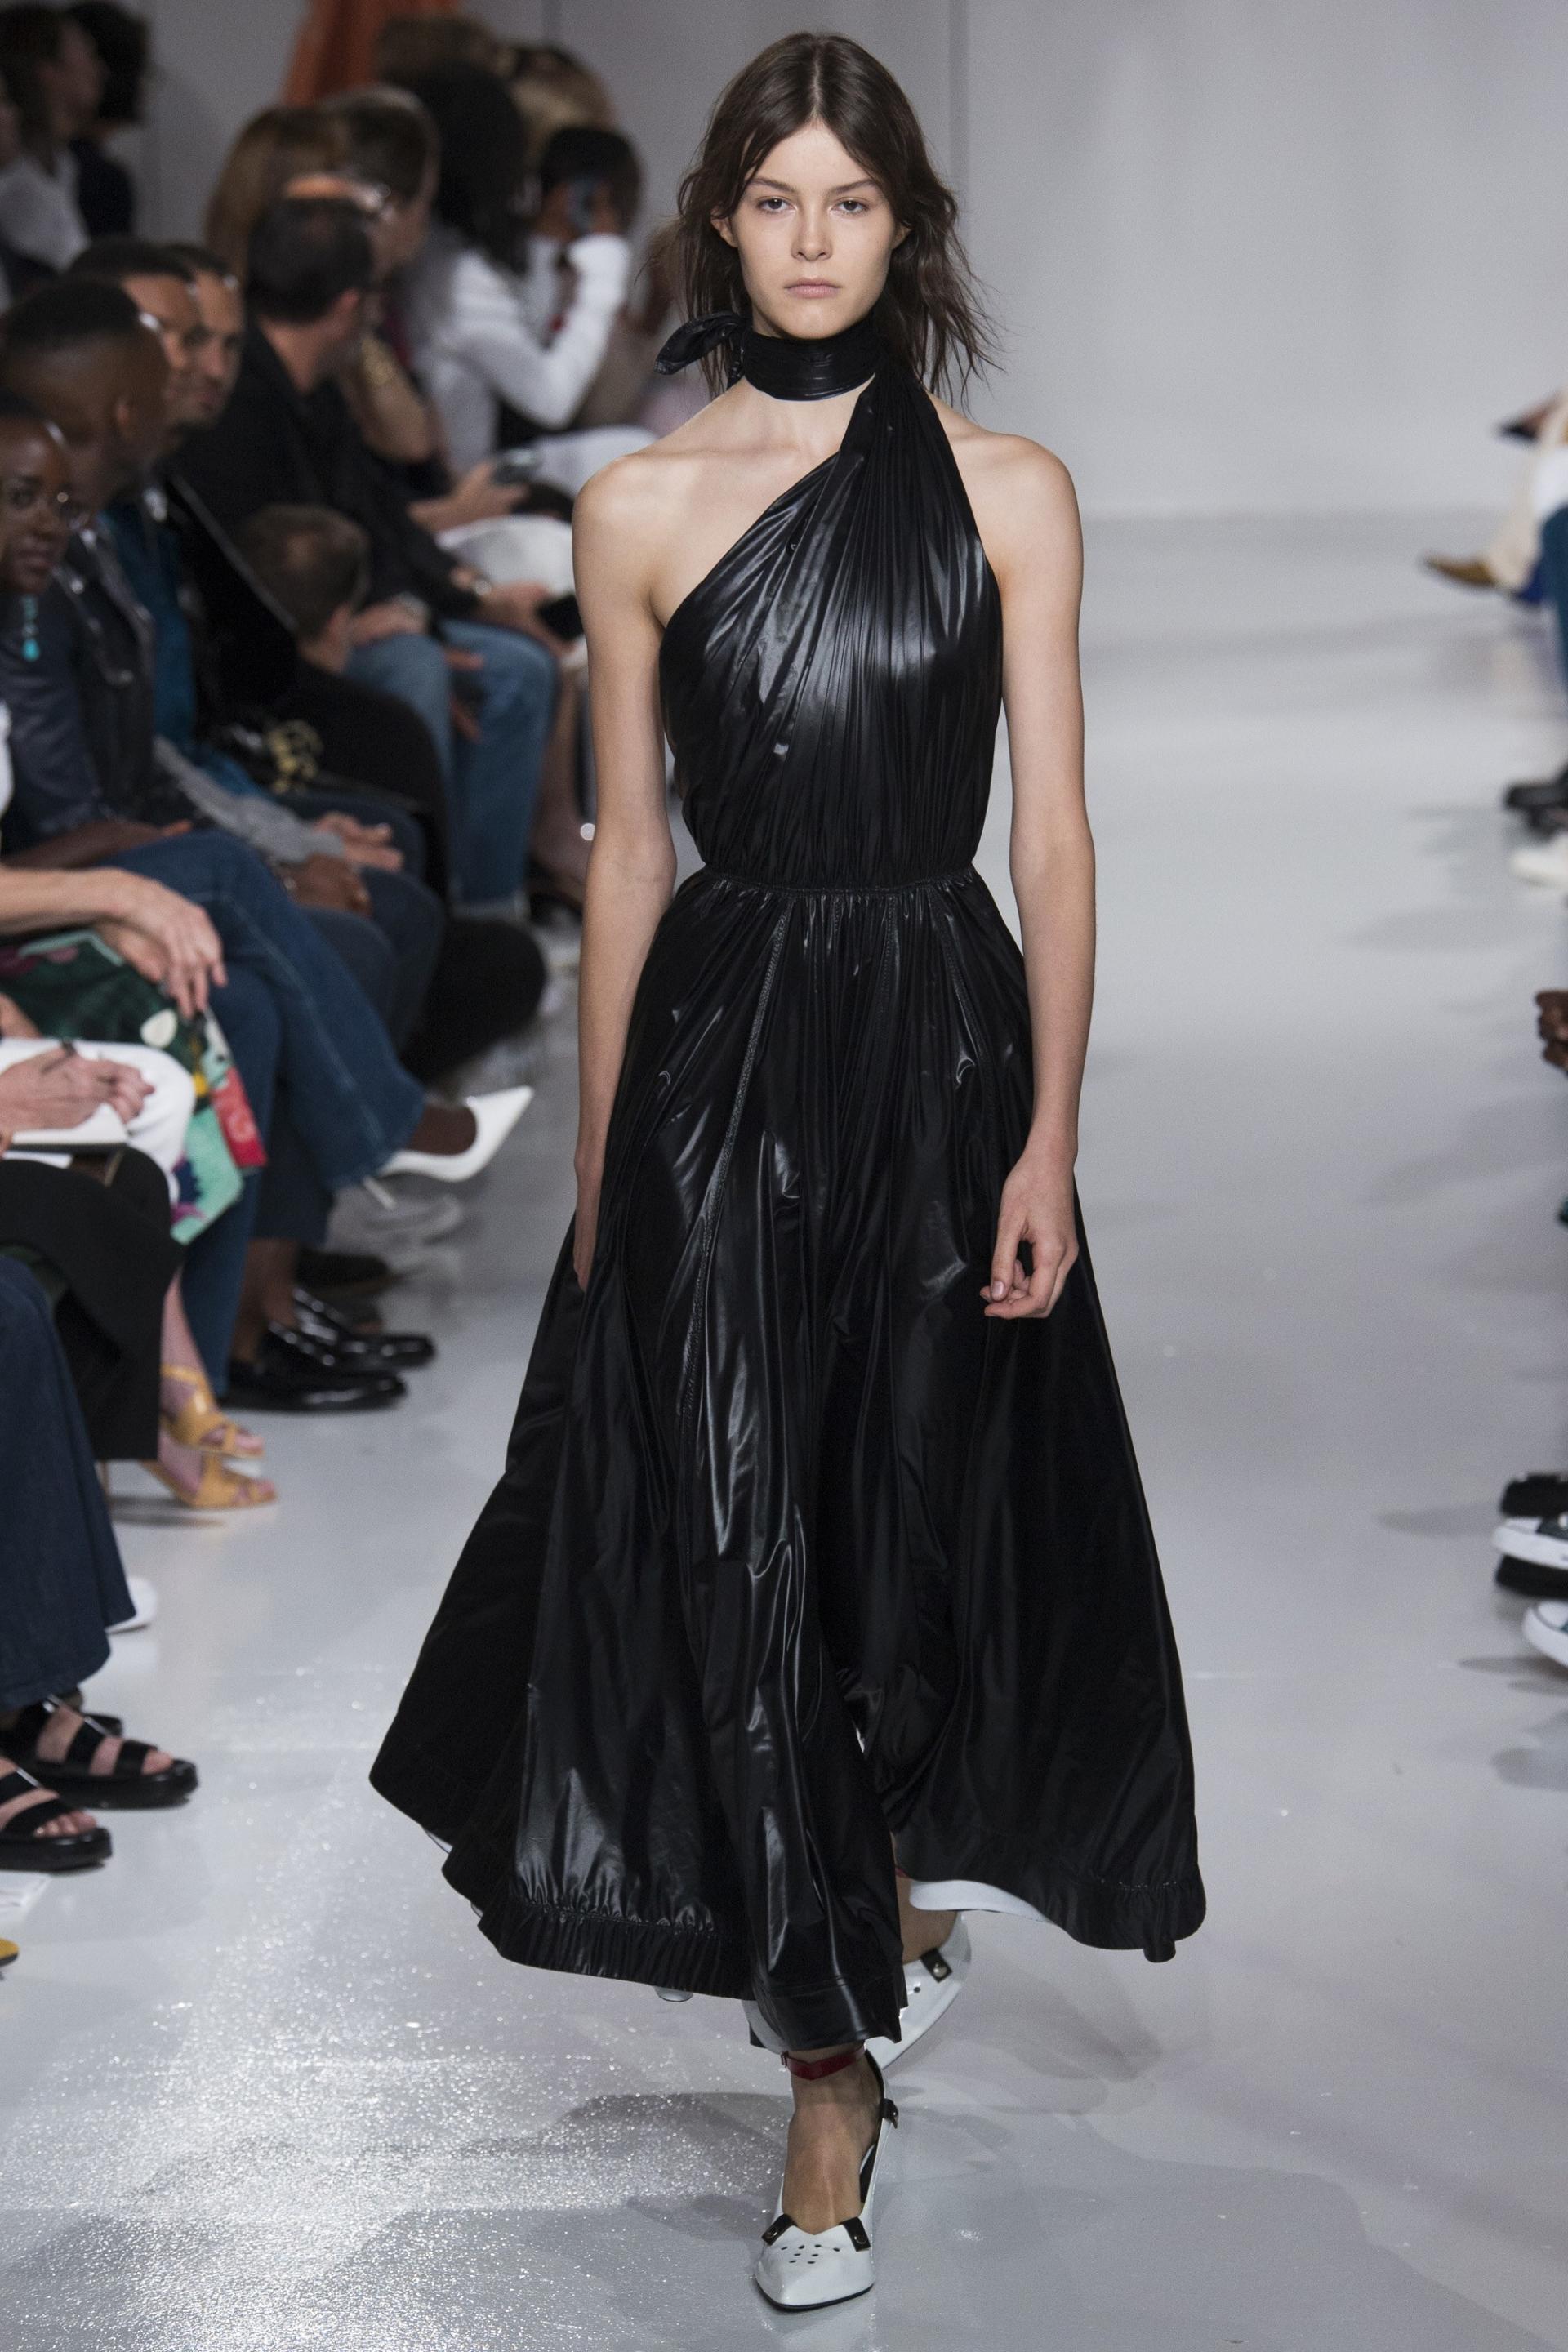 Rubber dress at the Calvin Klein Spring 2018 Show